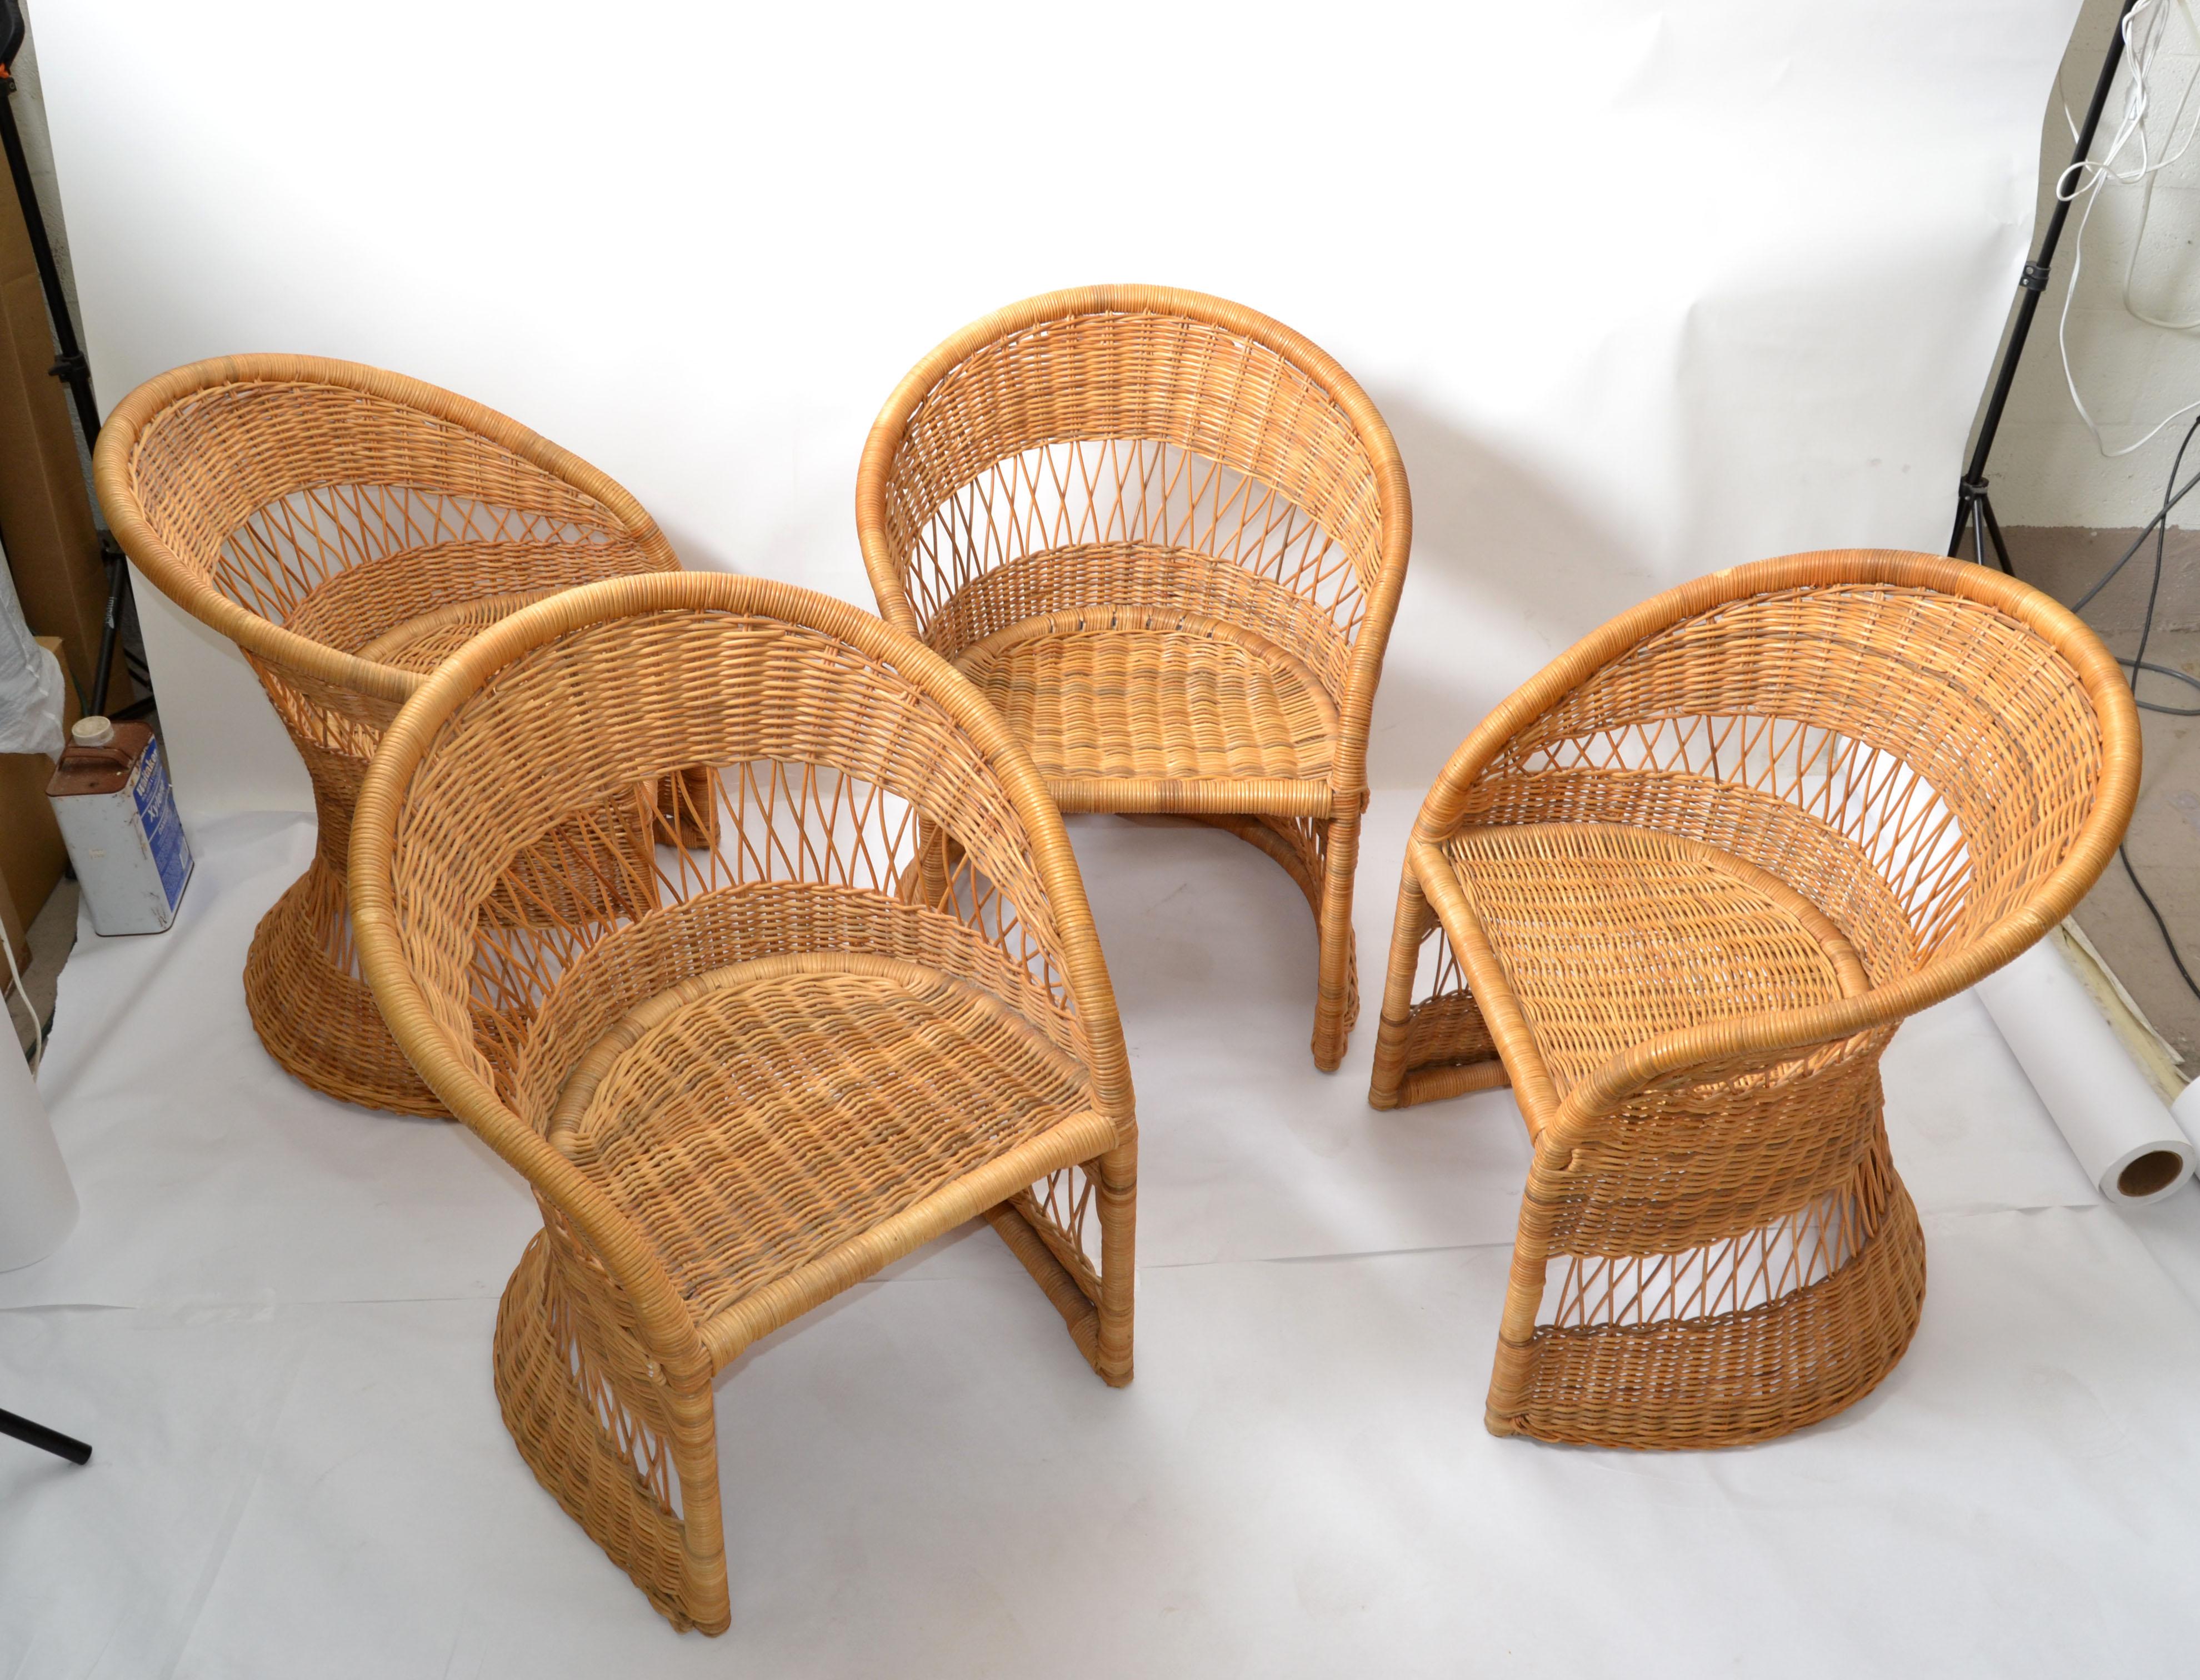 Hand-Crafted Boho Chic Mid-Century Modern Handcrafted Bamboo & Cane Dining Table & 4 Chairs For Sale